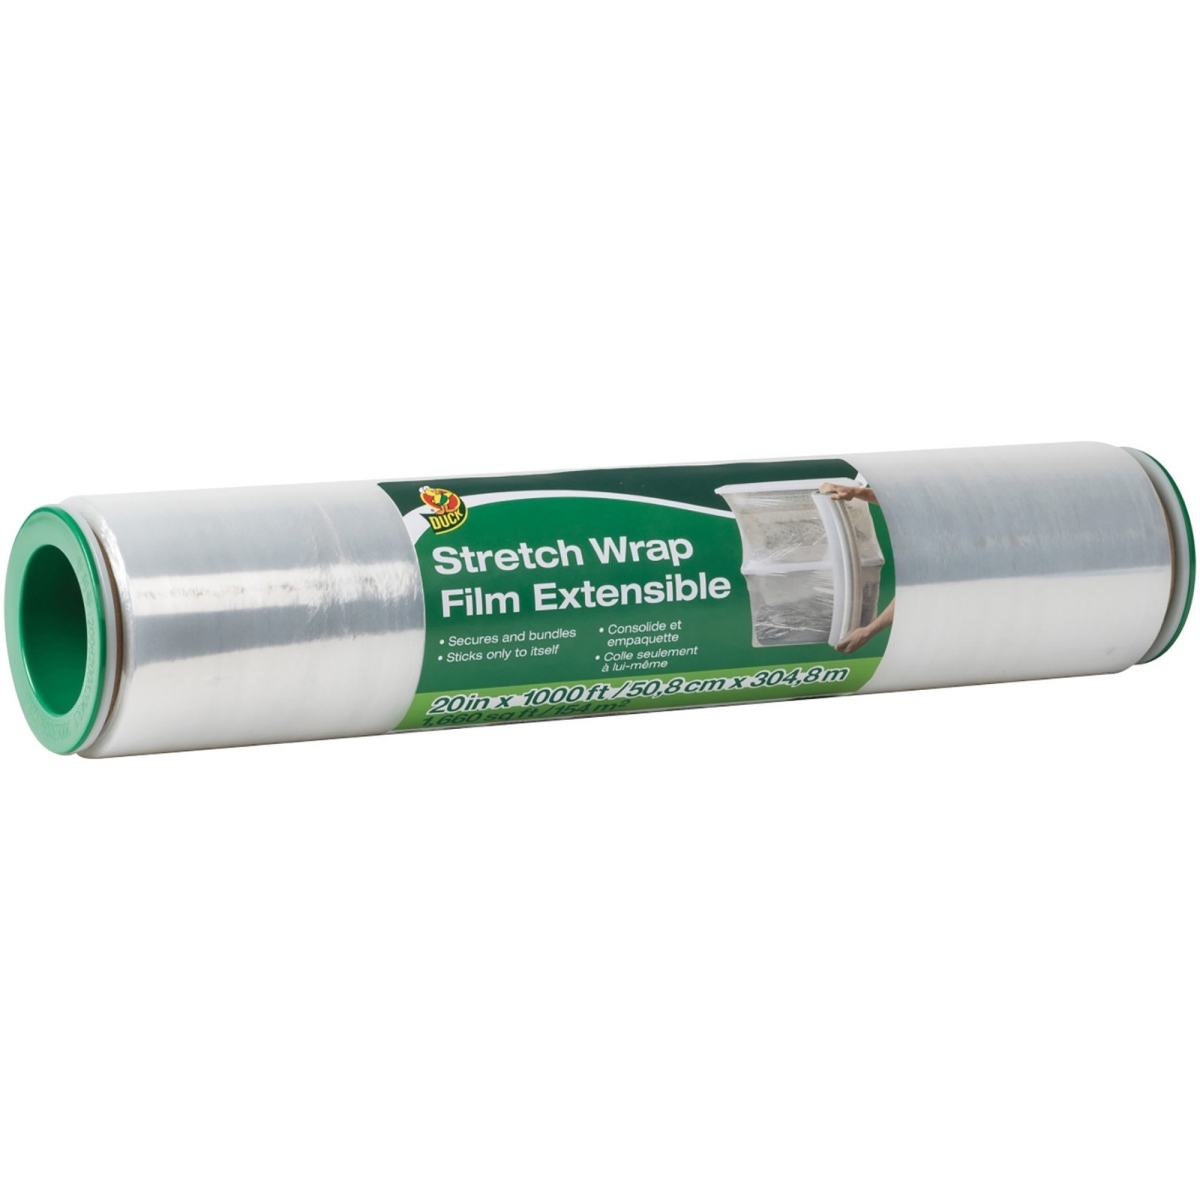 Duc285850 20 In. X 1000 Ft. Extensible Stretch Wrap Film, Clear